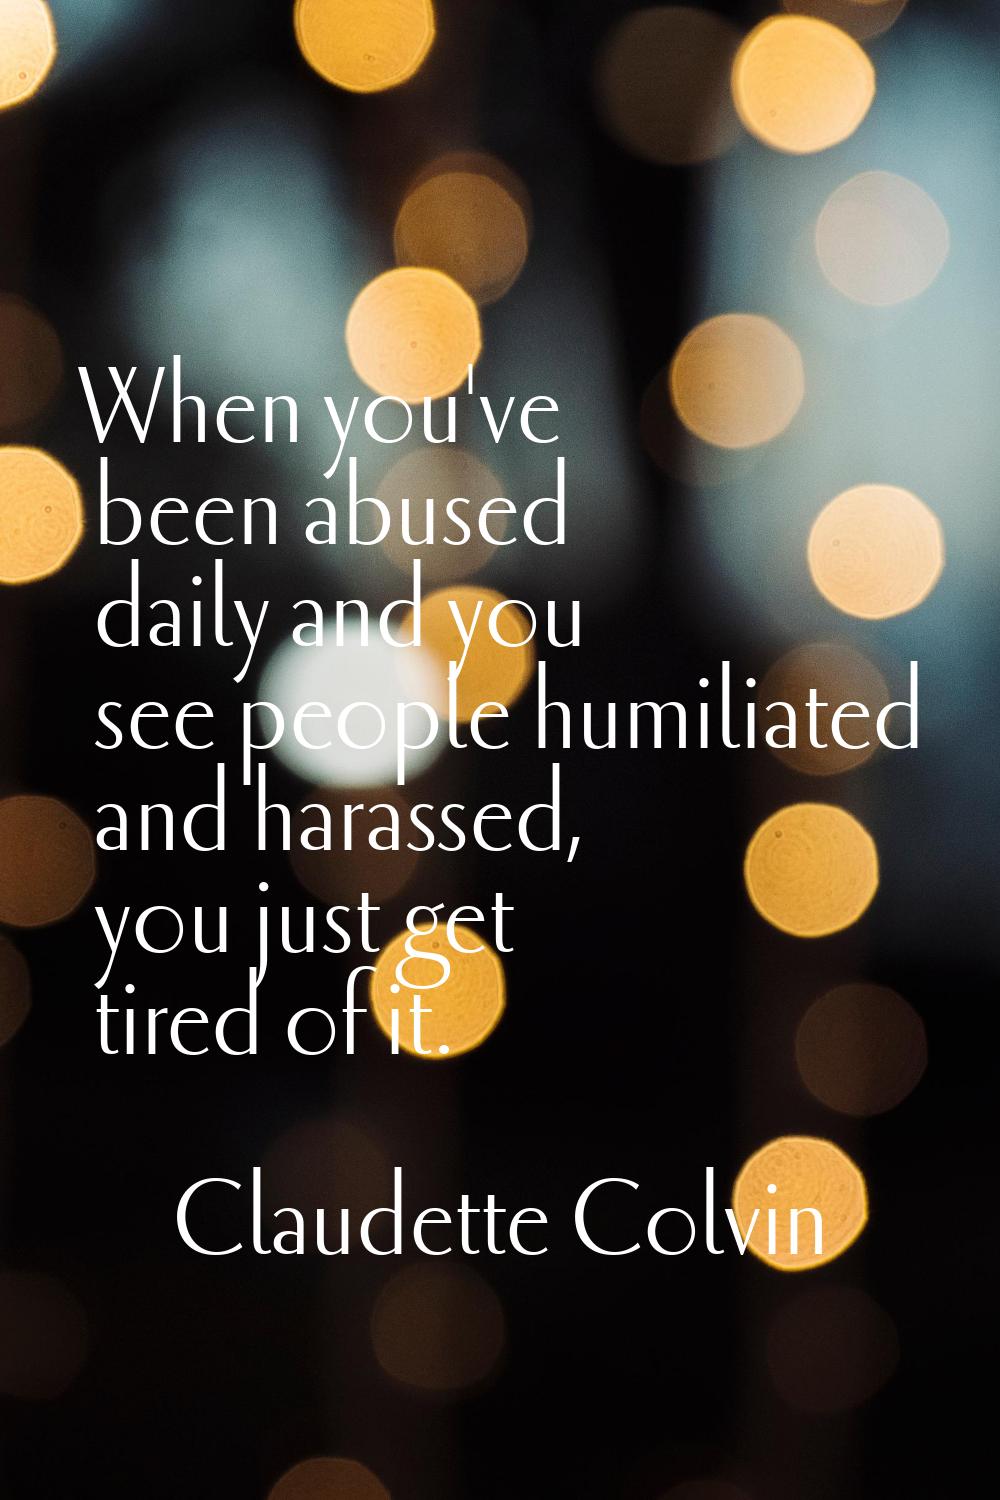 When you've been abused daily and you see people humiliated and harassed, you just get tired of it.